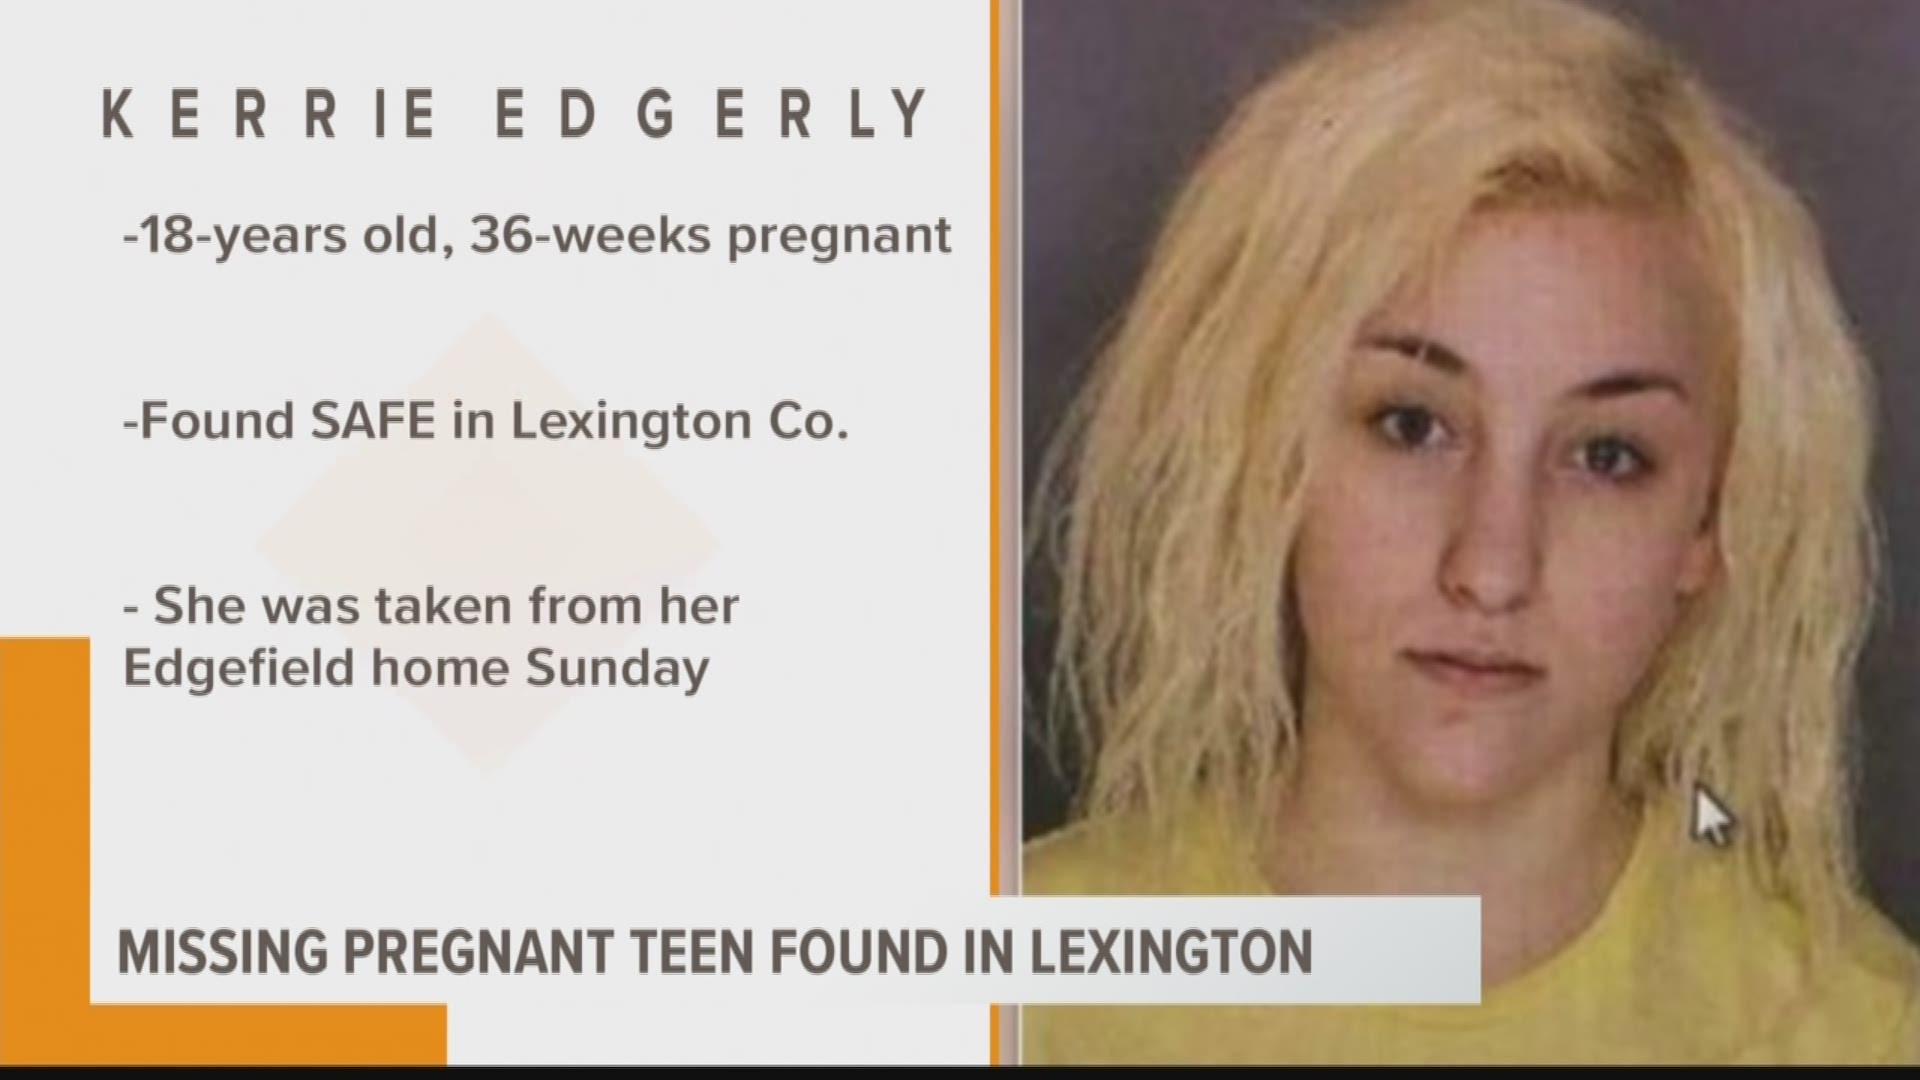 Kerrie Edgerly was found safe in Lexington County.